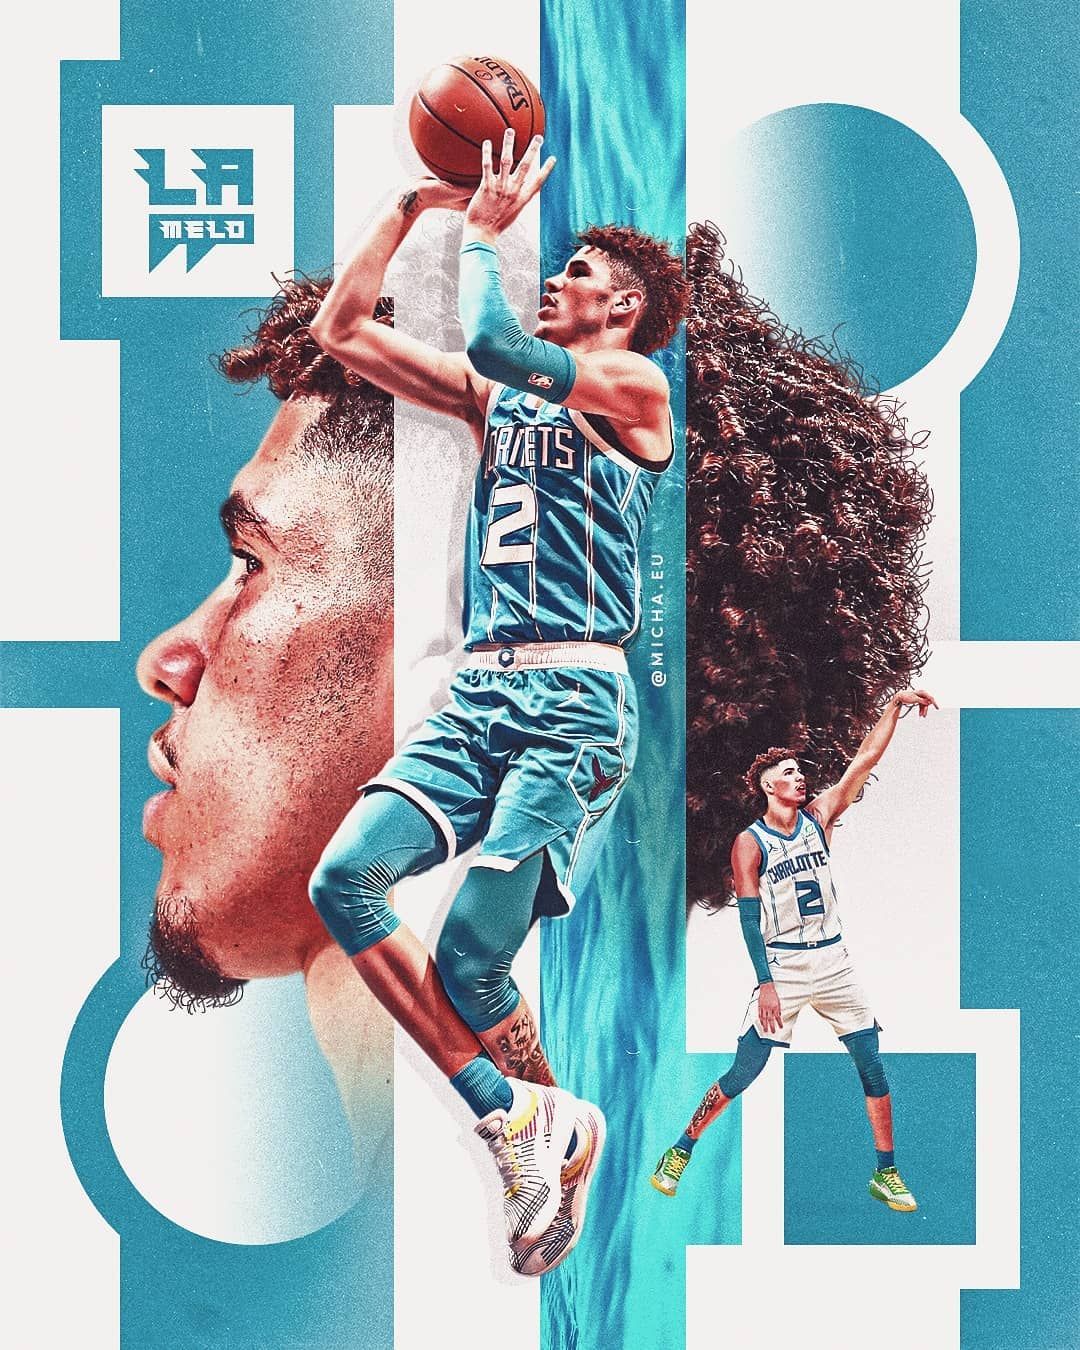 Download Lamelo Ball Lay-Up Wallpaper